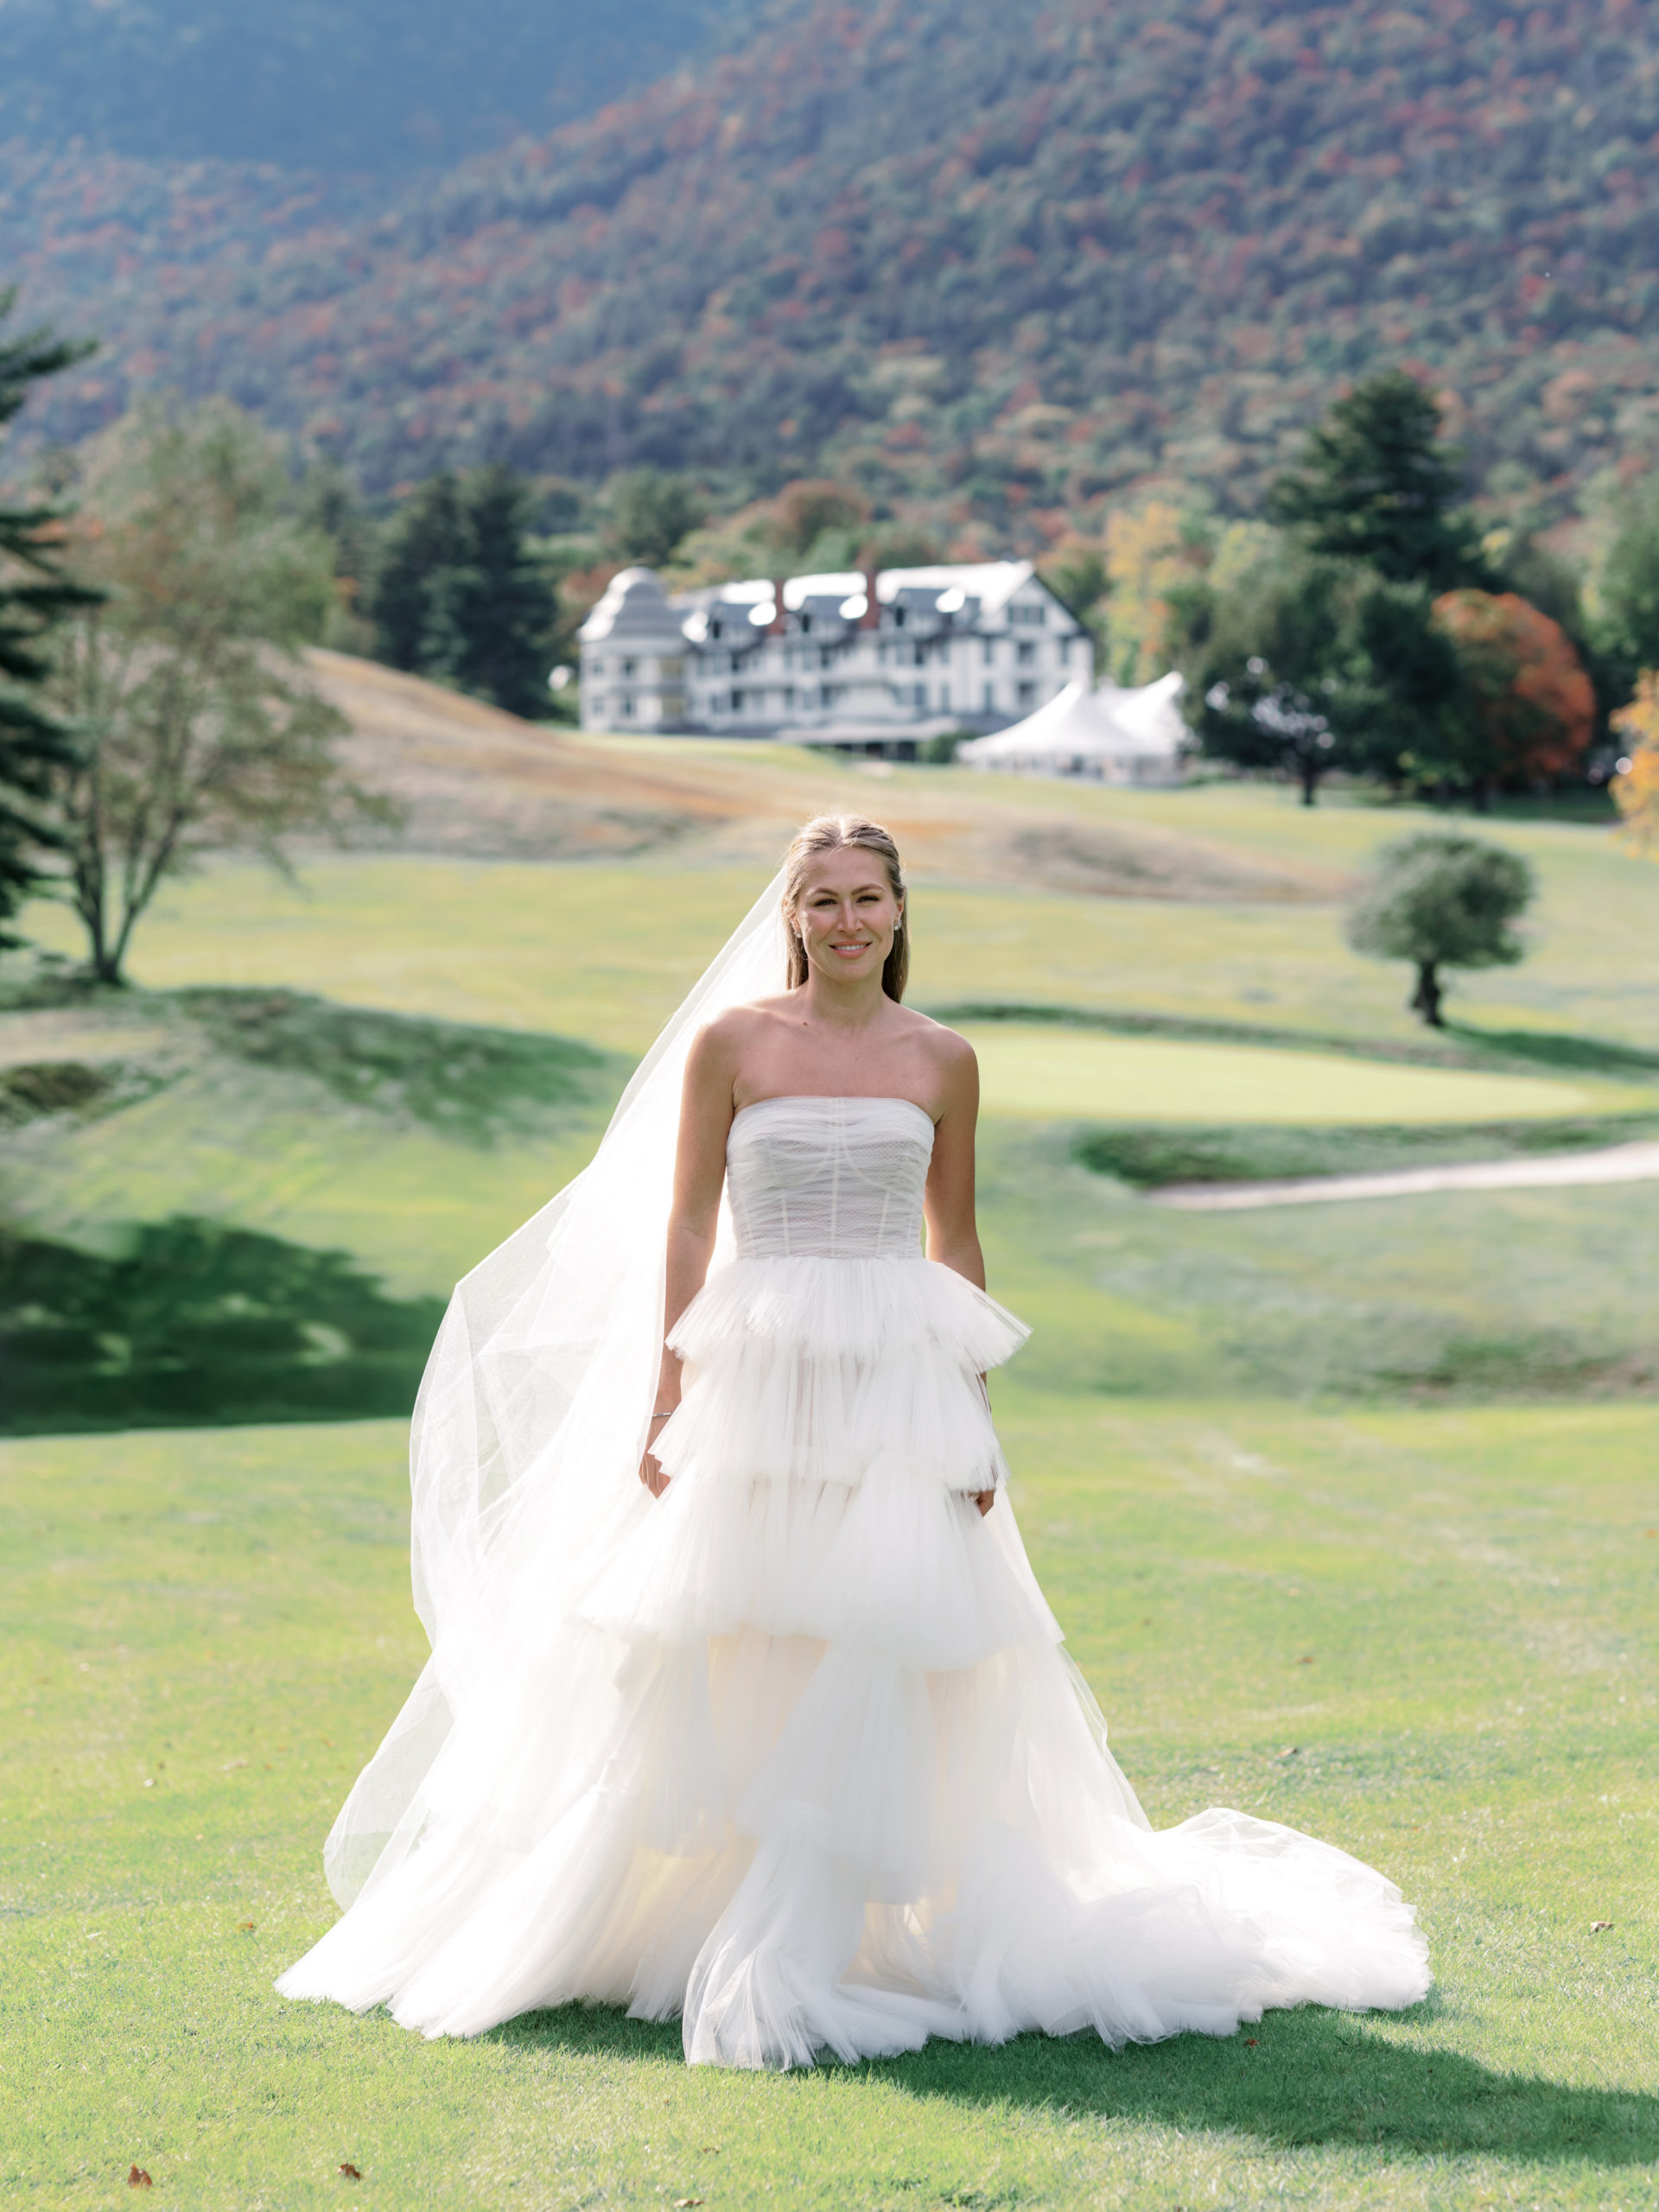 The gorgeous bride is standing in the middle of The Ausable Club's golf course. Image by Jenny Fu Studio